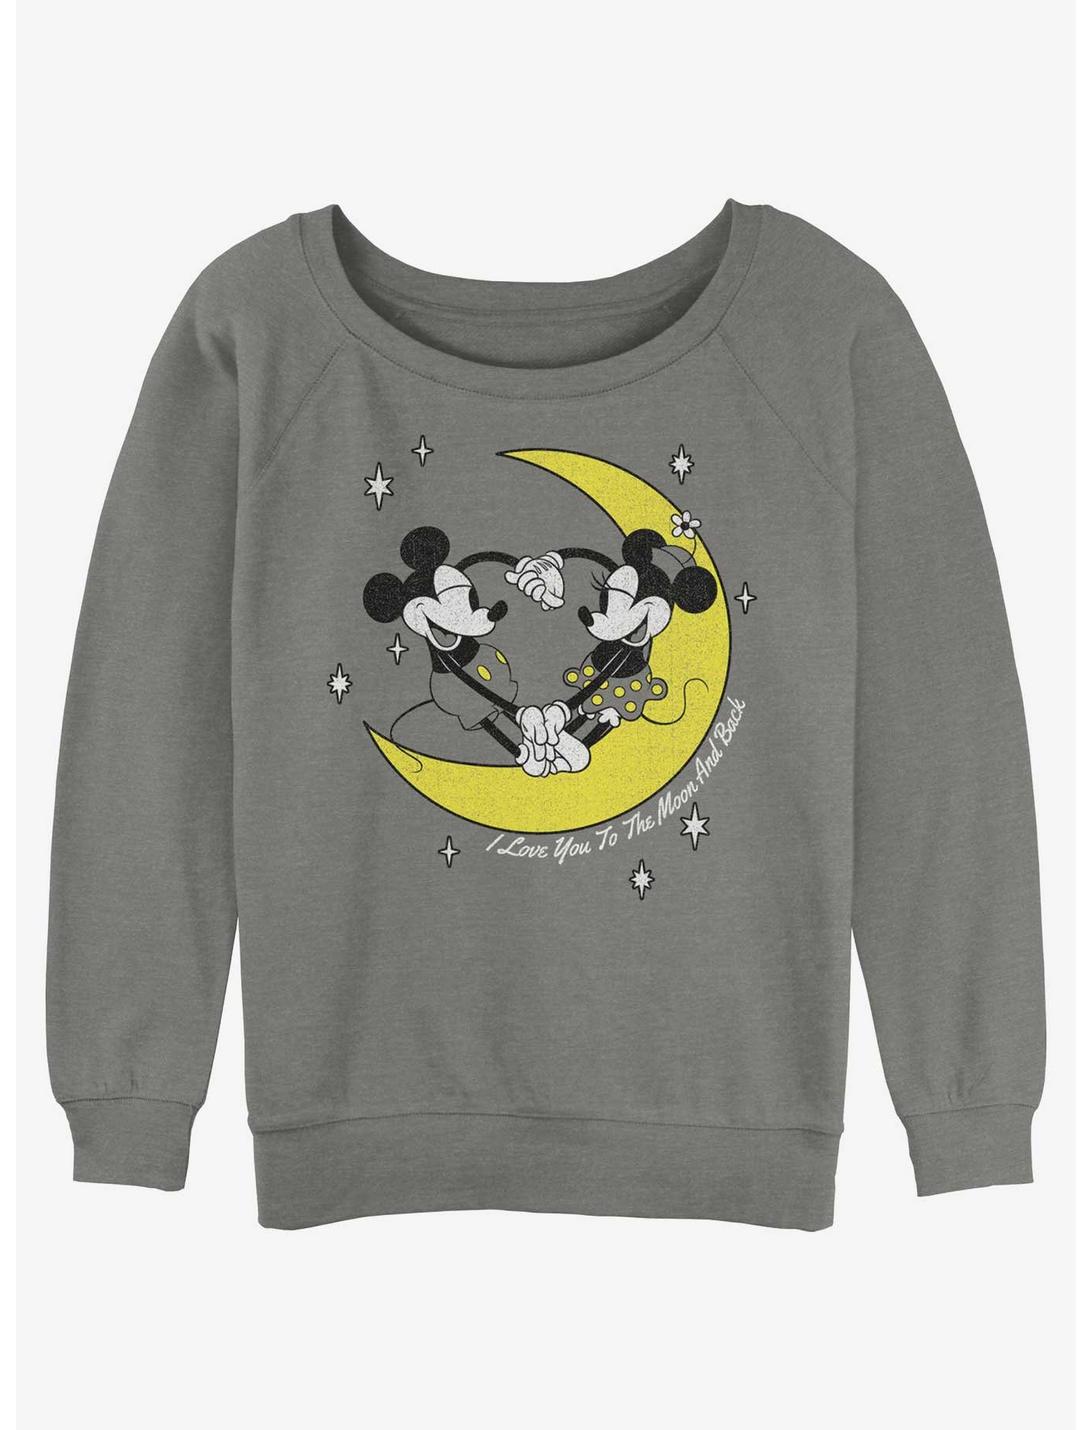 Disney Mickey Mouse I Love You To The Moon And Back Girls Slouchy Sweatshirt, GRAY HTR, hi-res